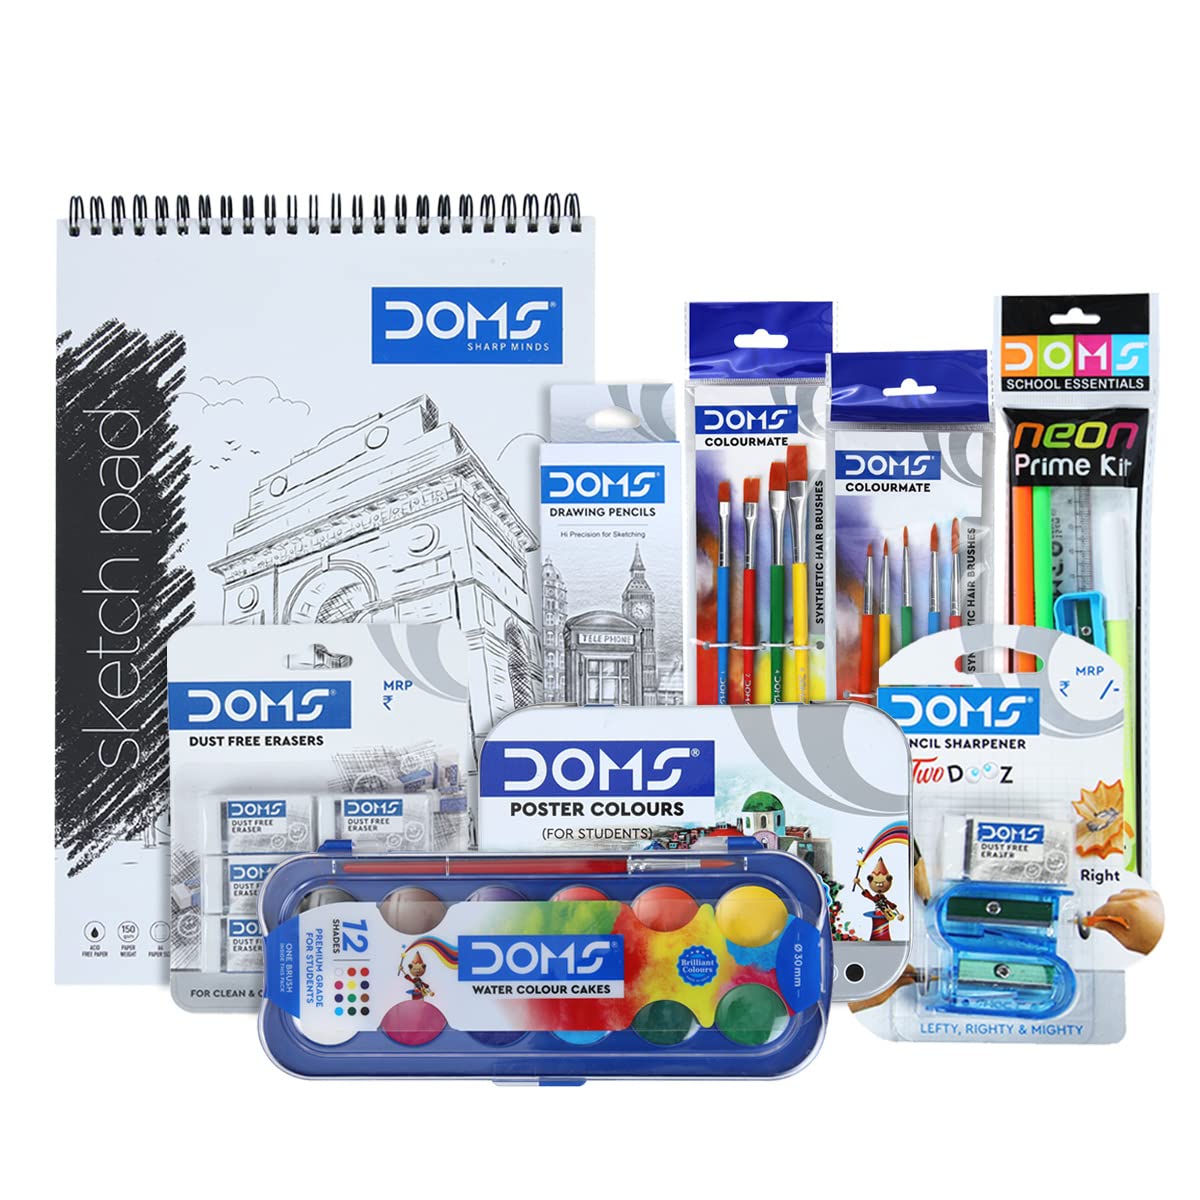 DOMS Painting Smart Kit Mega Gift Pack | Painting Set for Kids | Best for School, College & Office | 21 Assorted Items | Color Pencil, Sketching Pencil, Watercolor, Drawing Book | DOMS Stationery